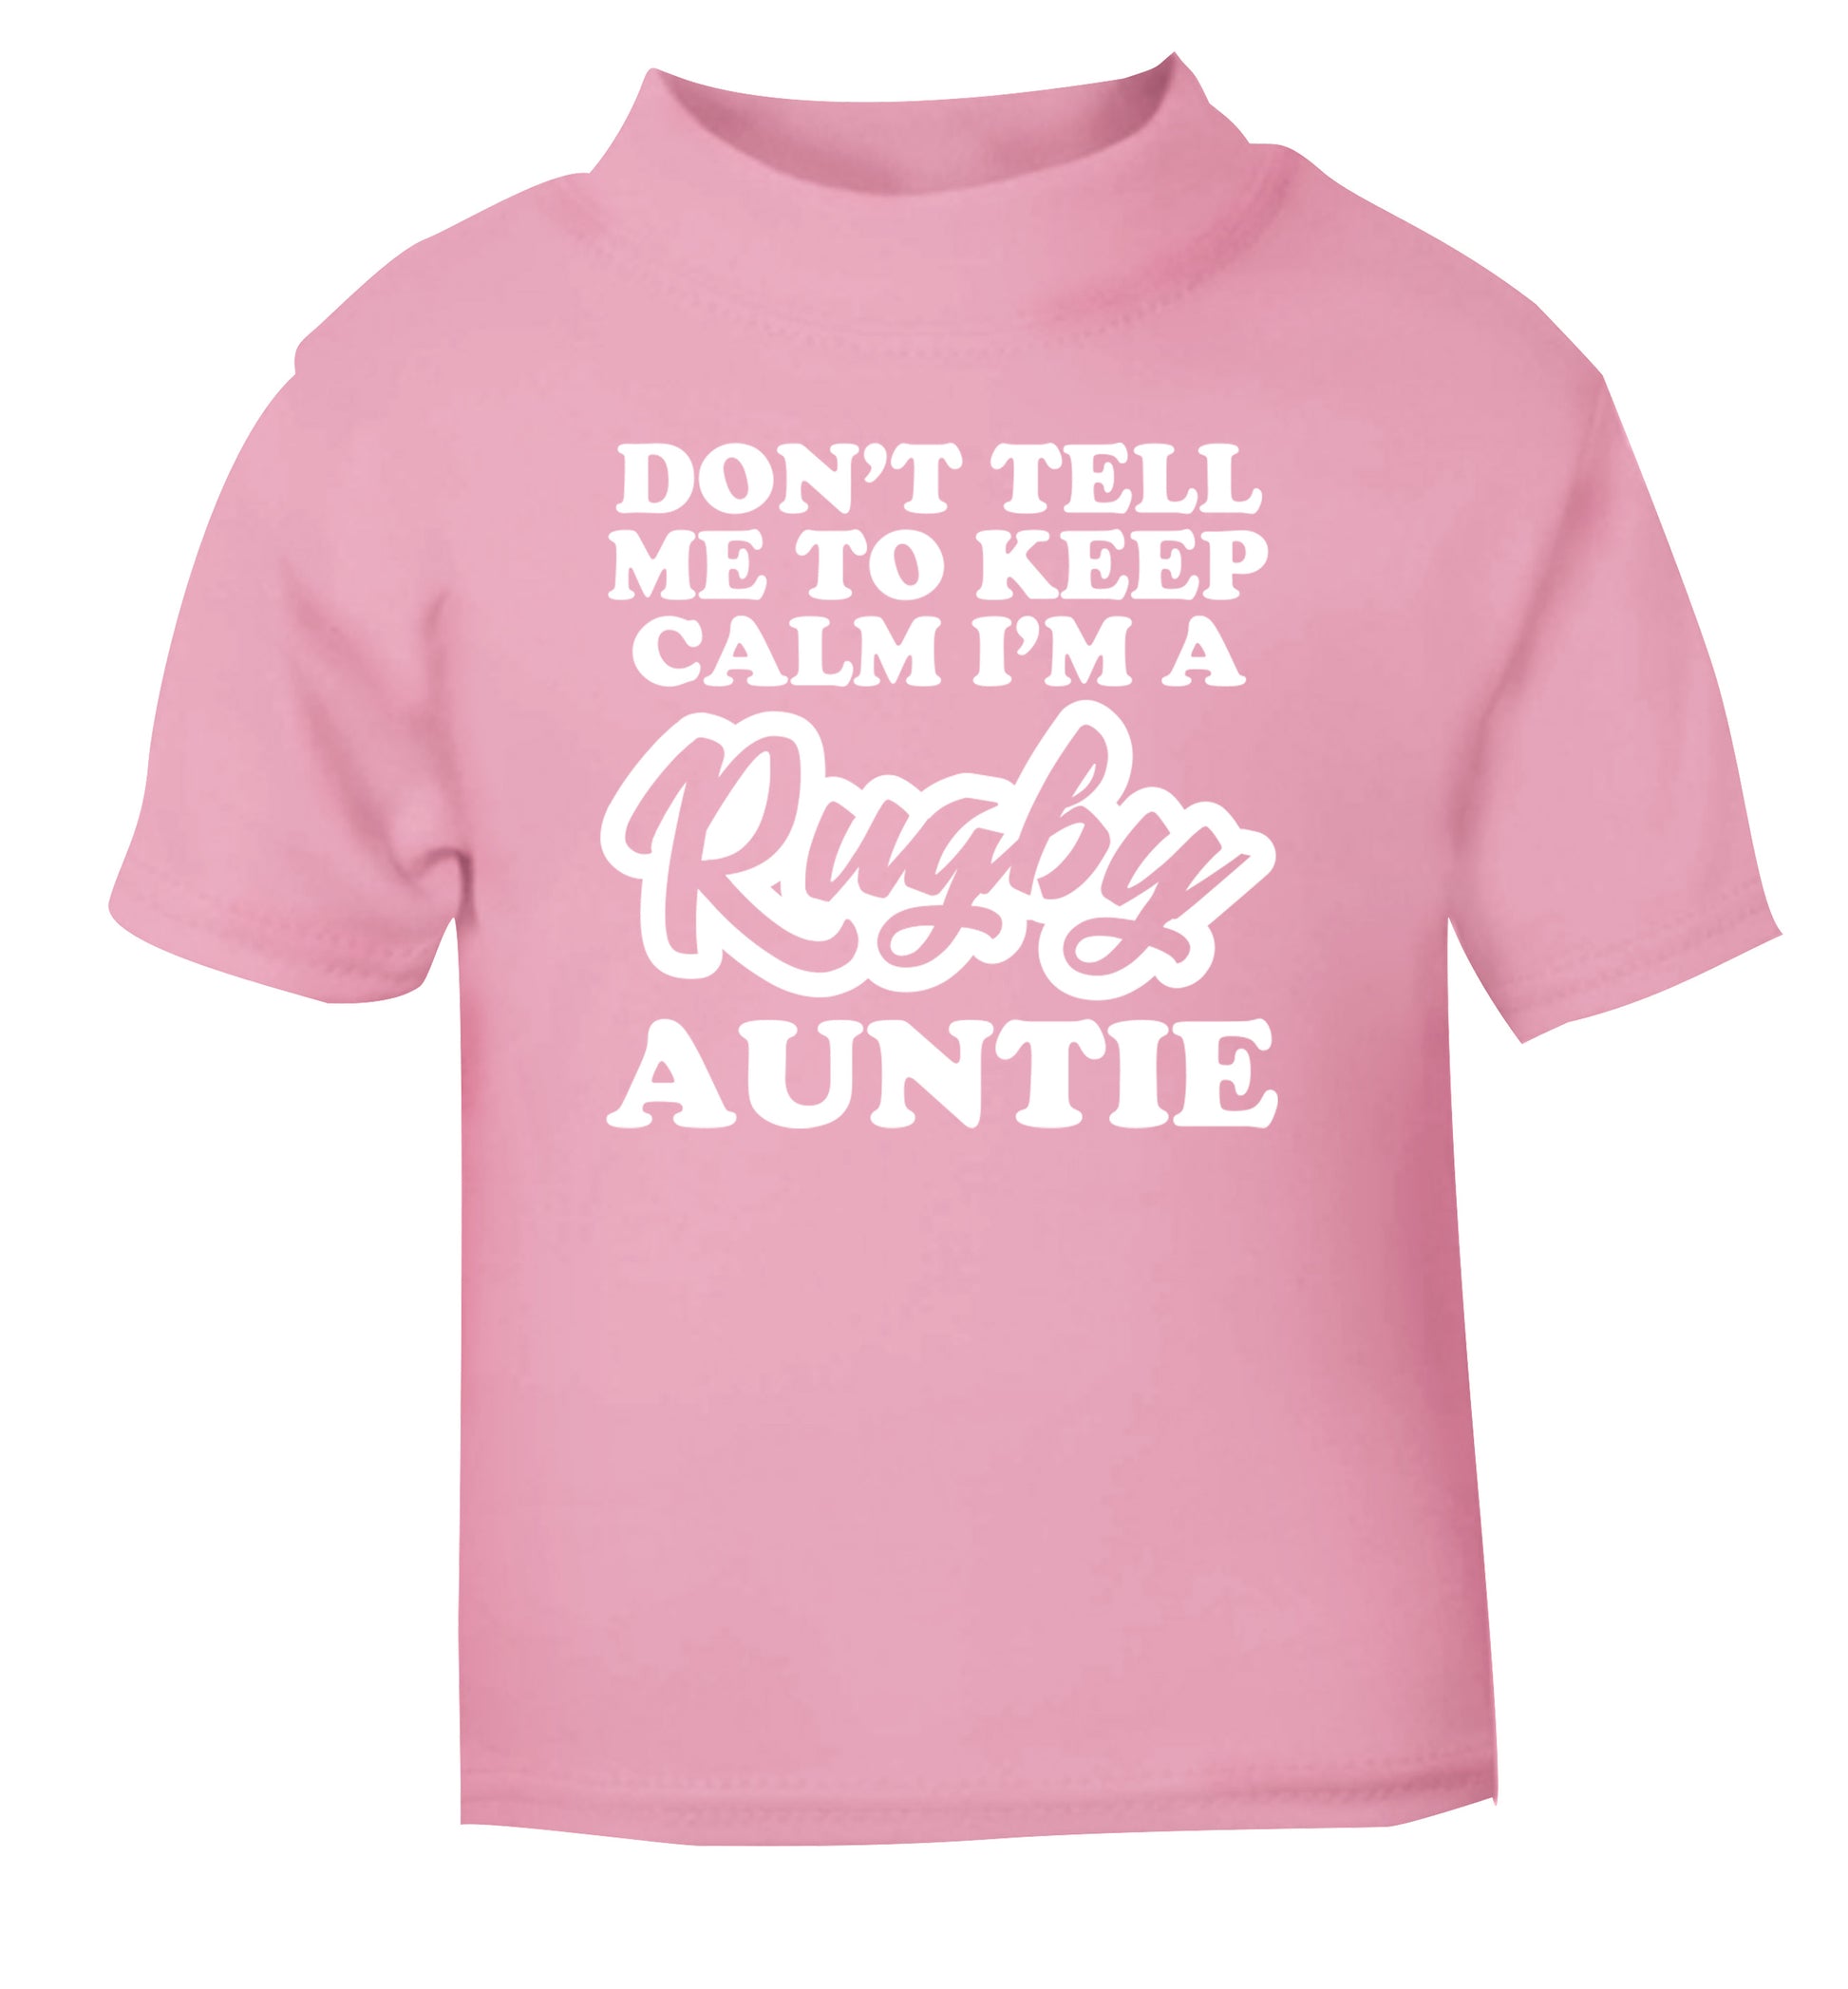 Don't tell me keep calm I'm a rugby auntie light pink Baby Toddler Tshirt 2 Years